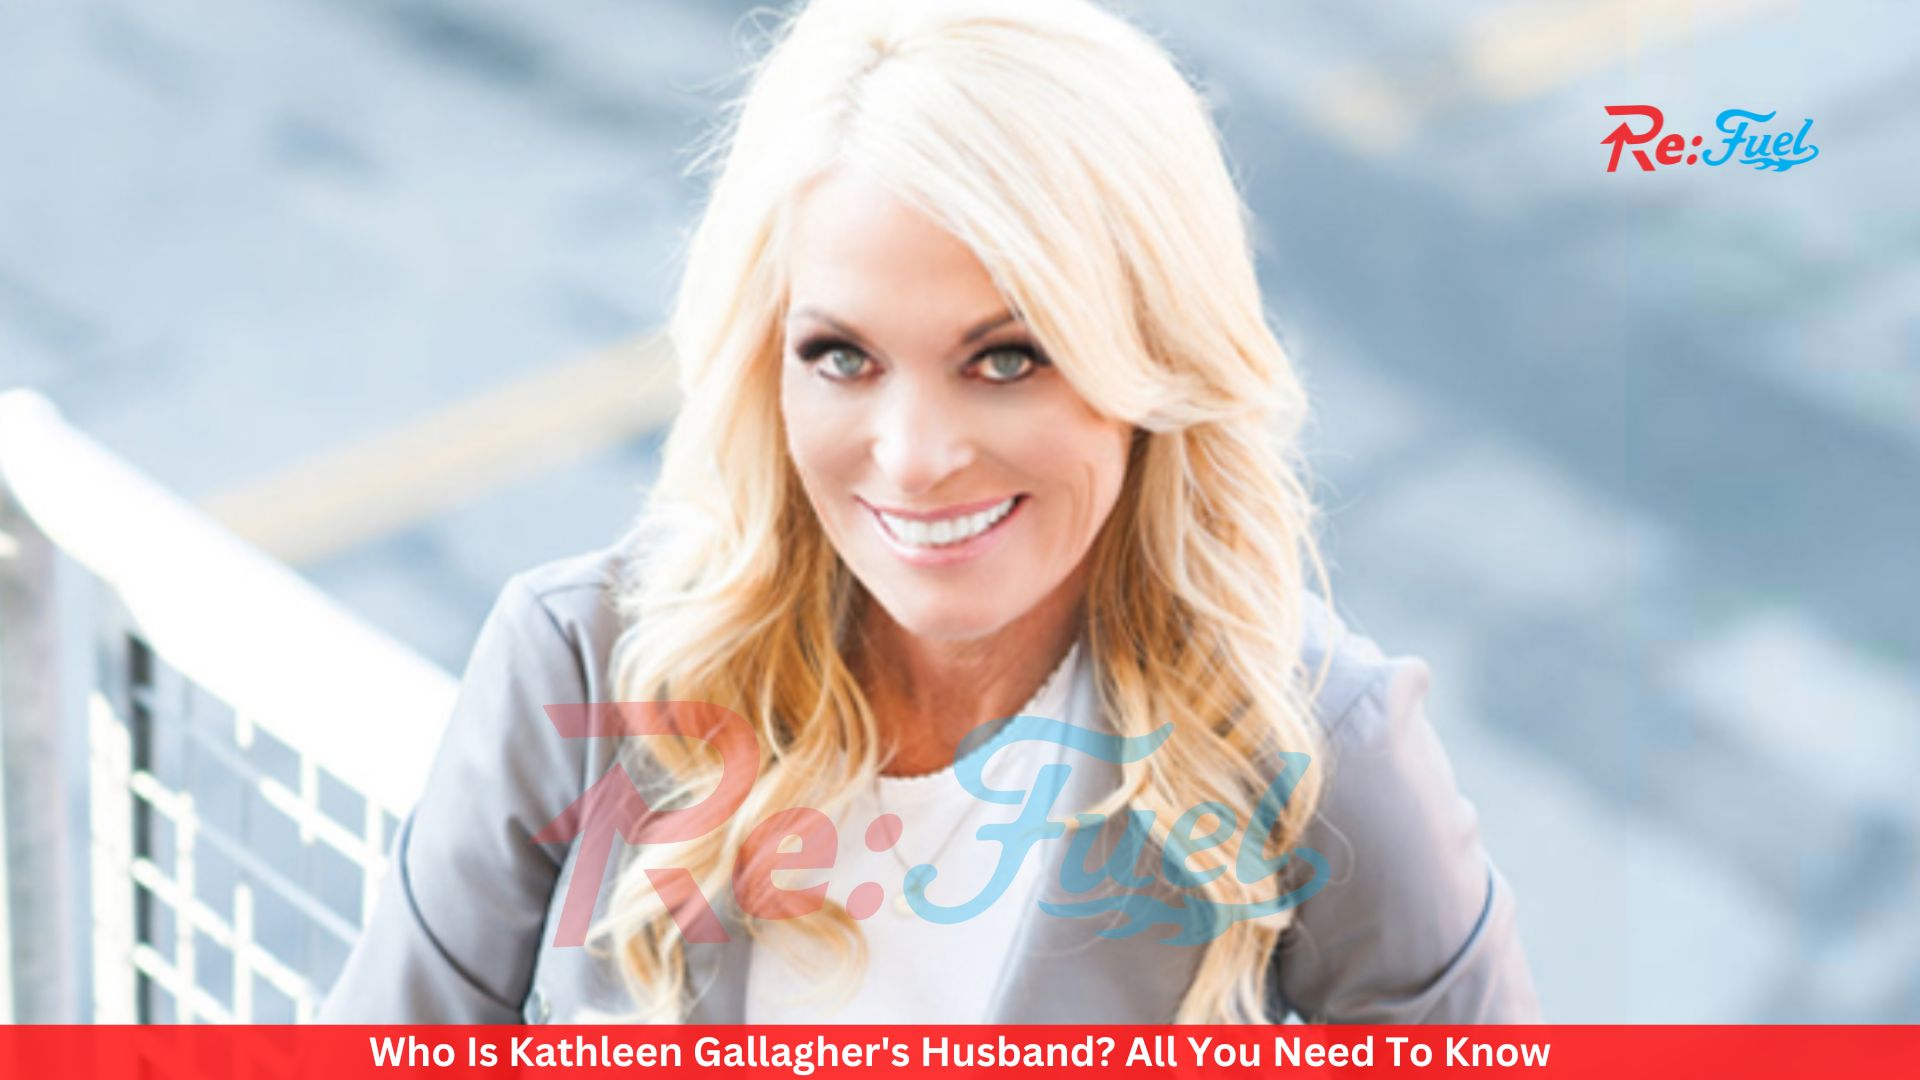 Who Is Kathleen Gallagher's Husband? All You Need To Know